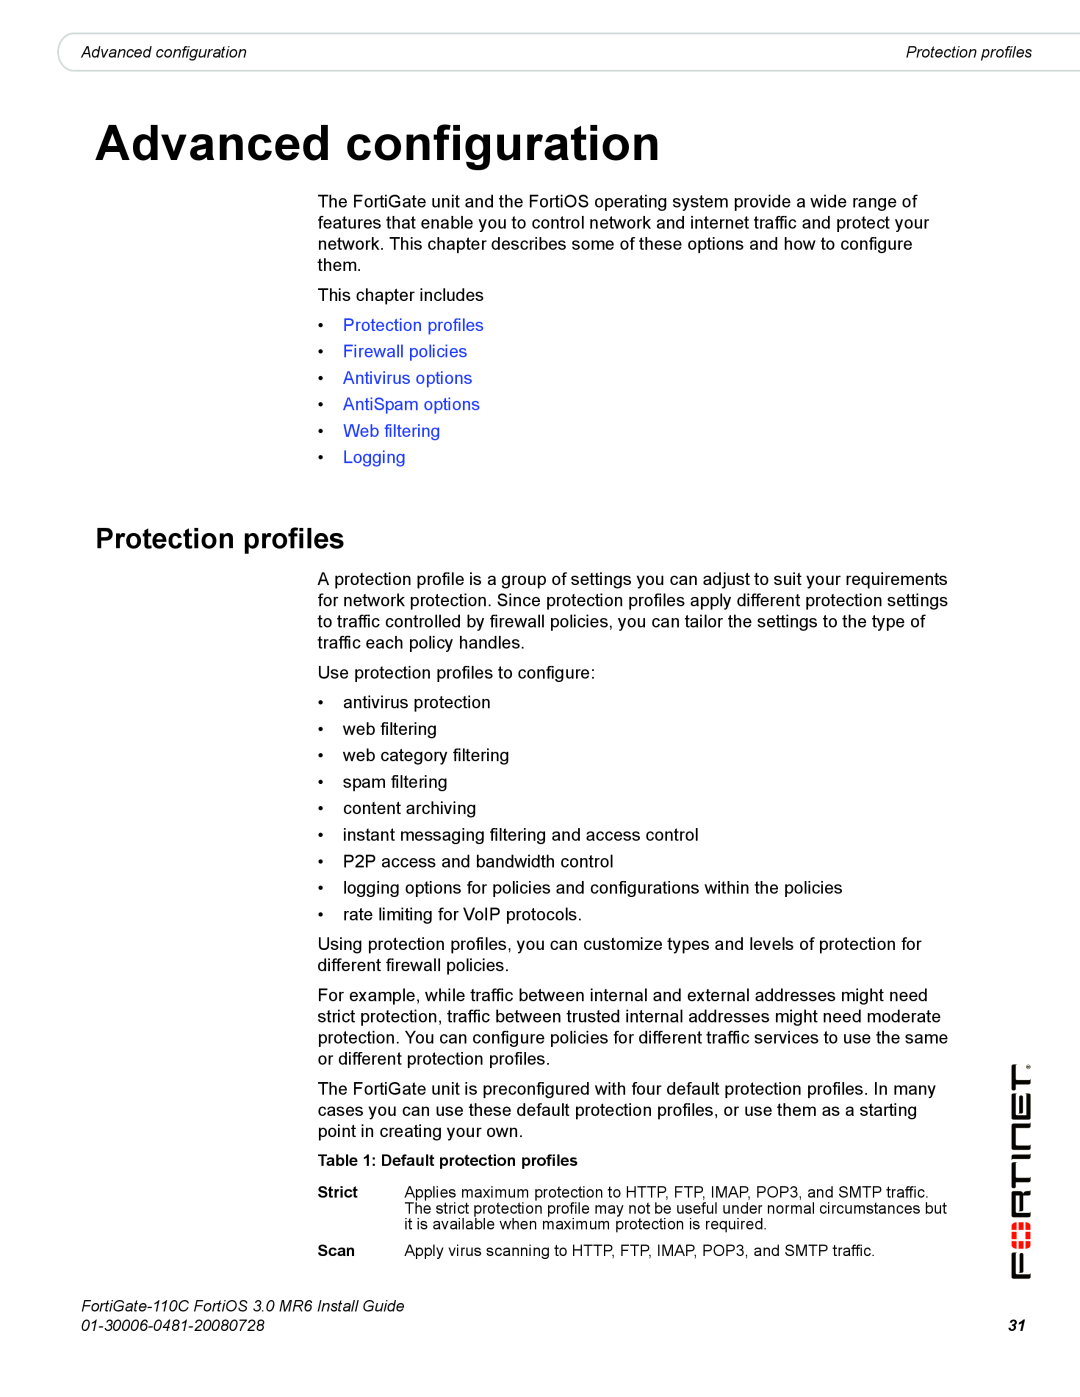 Fortinet 110C manual Advanced configuration, Protection profiles Firewall policies Antivirus options 